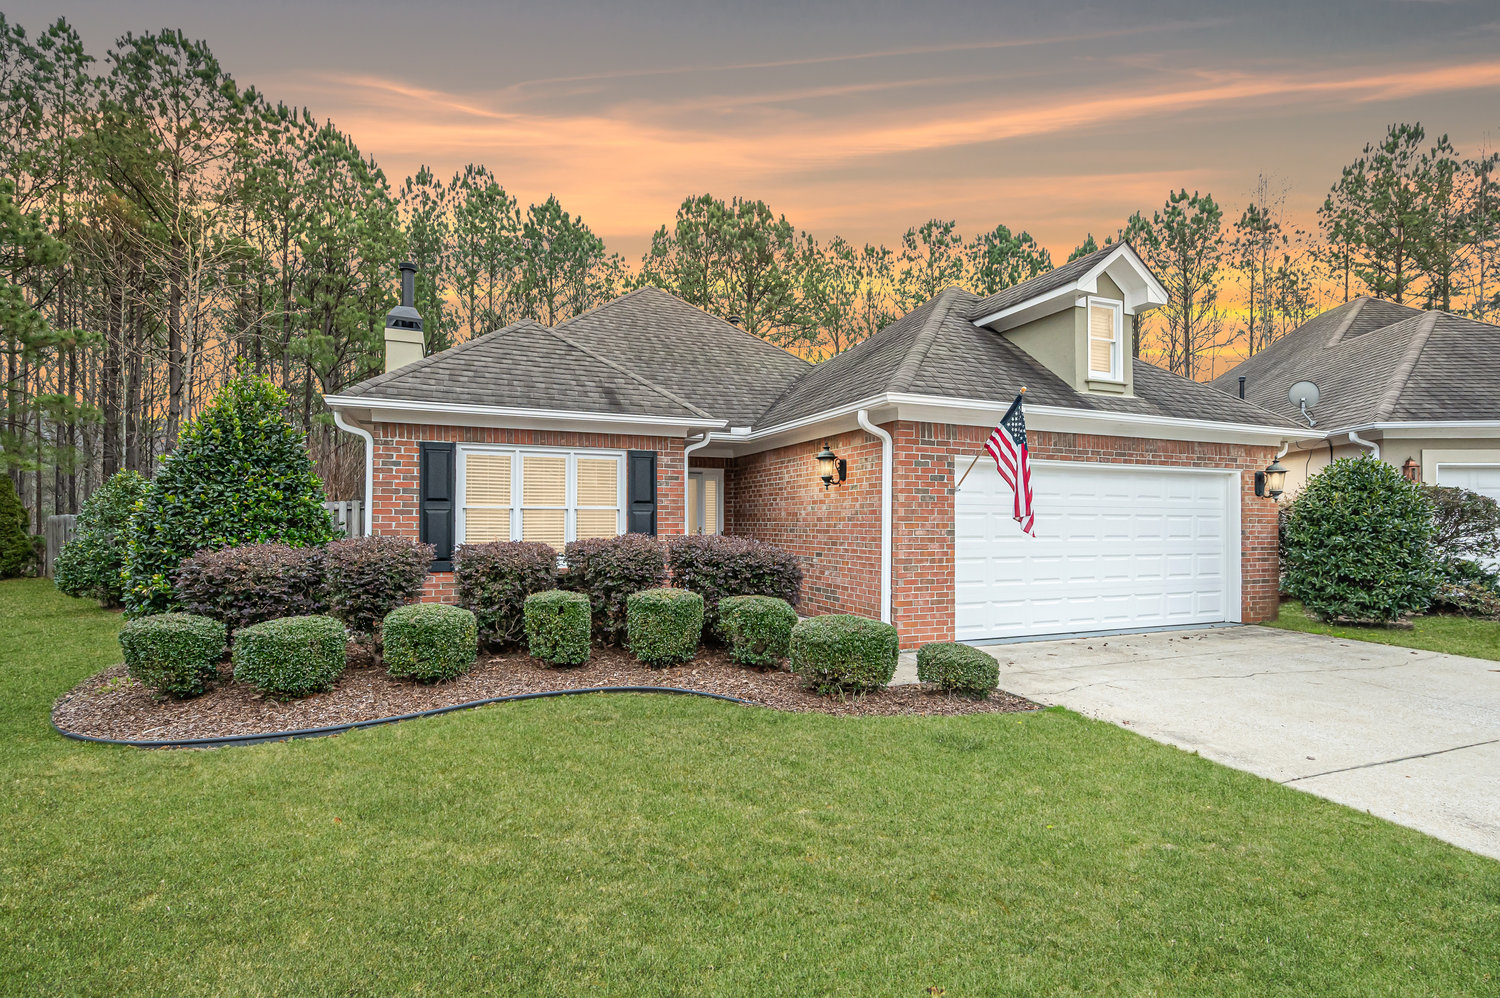 Virtual Tour of Birmingham Metro Real Estate Listing For Sale | 4565 Guilford Circle, Hoover, AL 35242